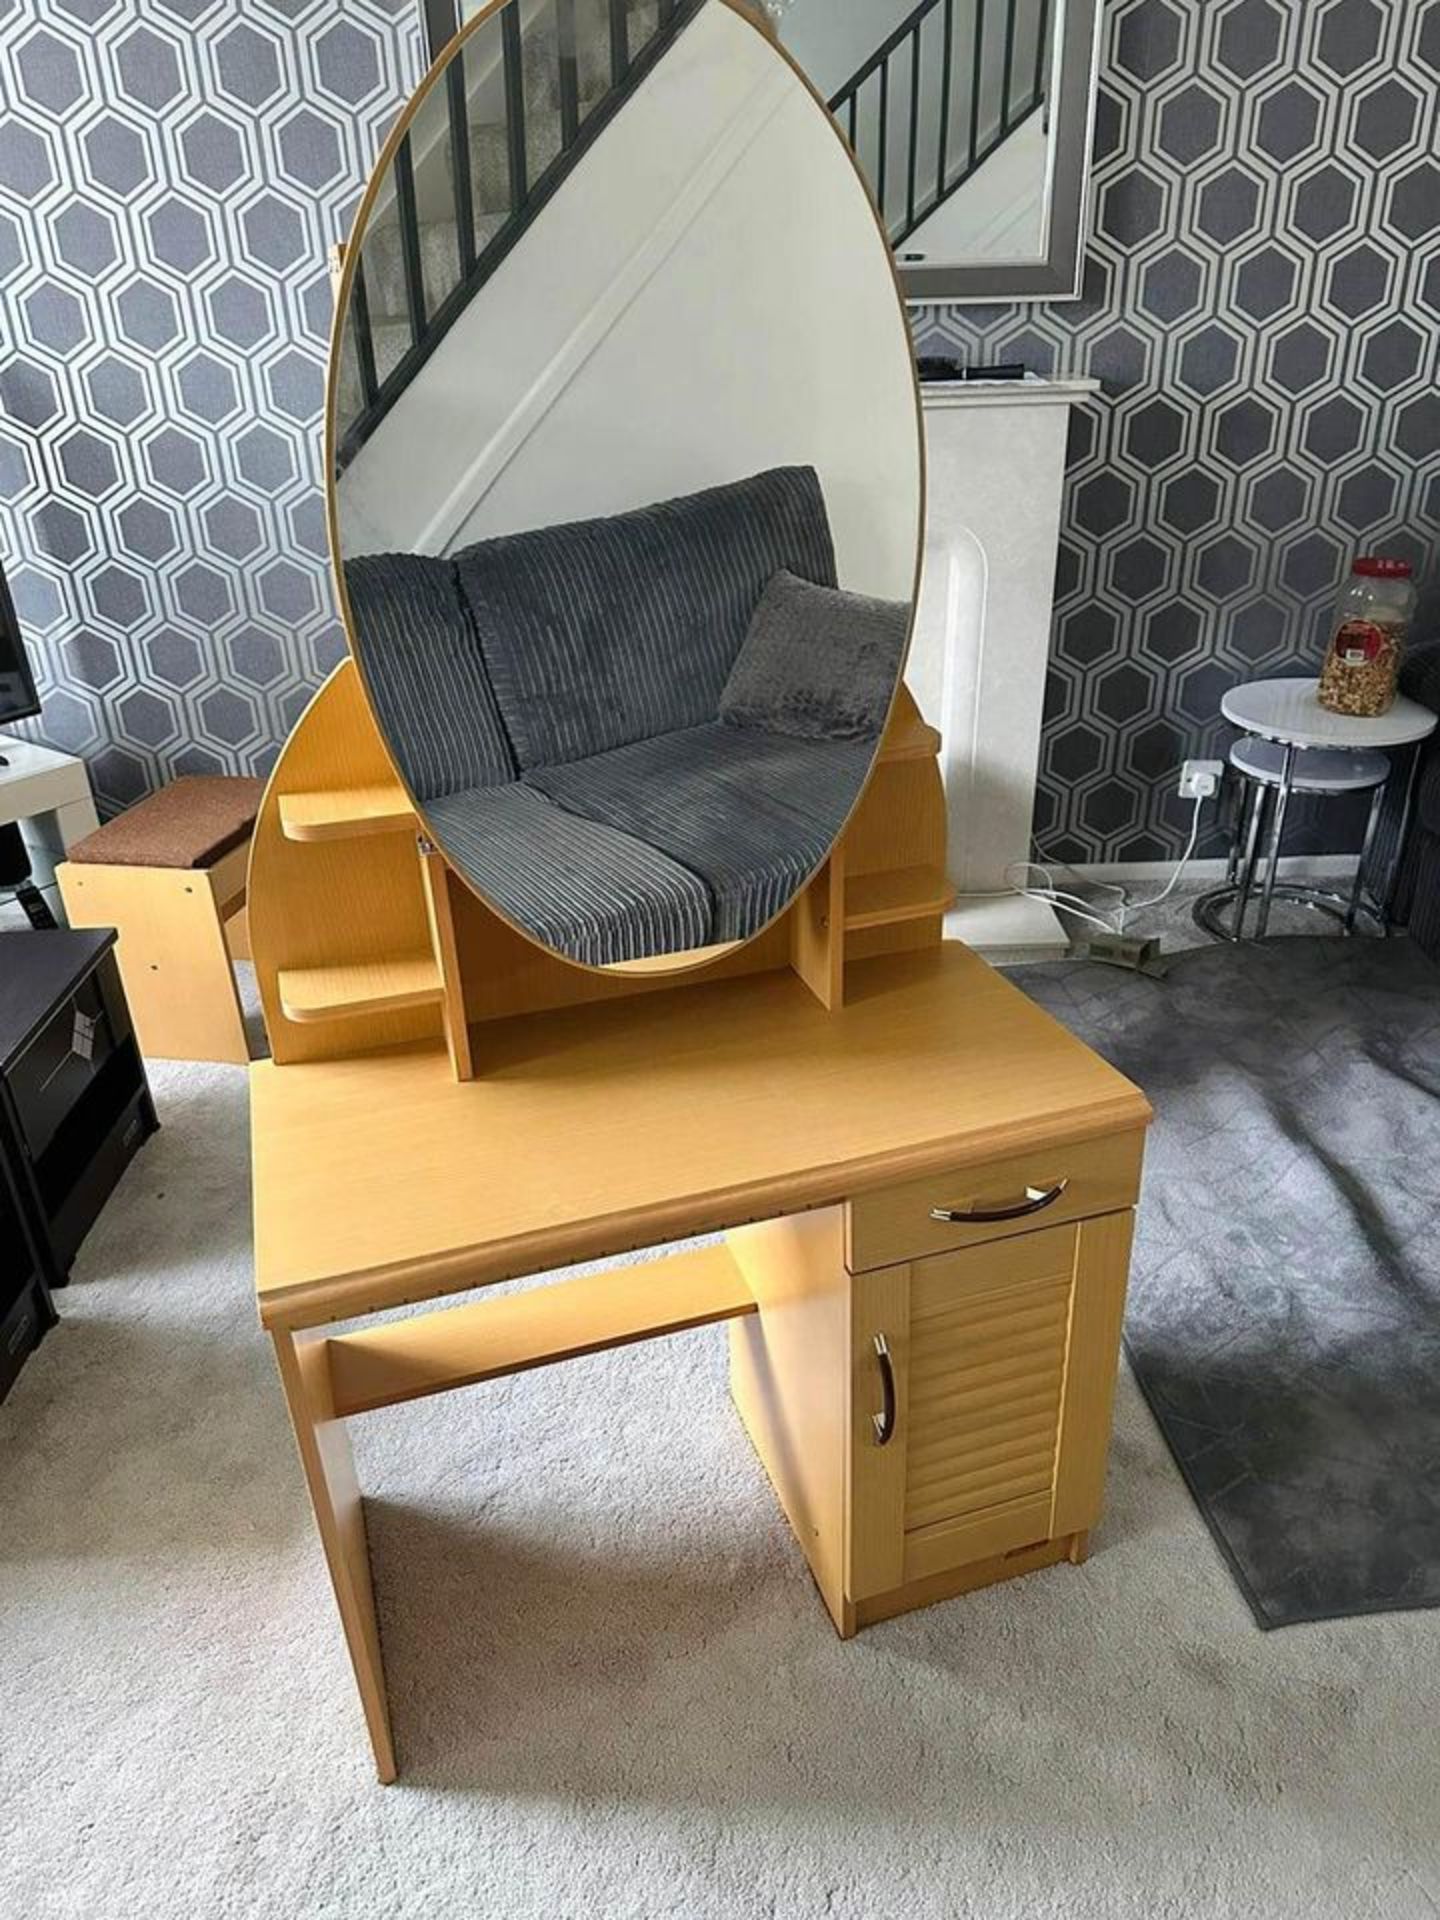 DRESSING TABLE WITH STOOL AND MIRROR BRAND NEW BOXED ITEM - Image 3 of 7